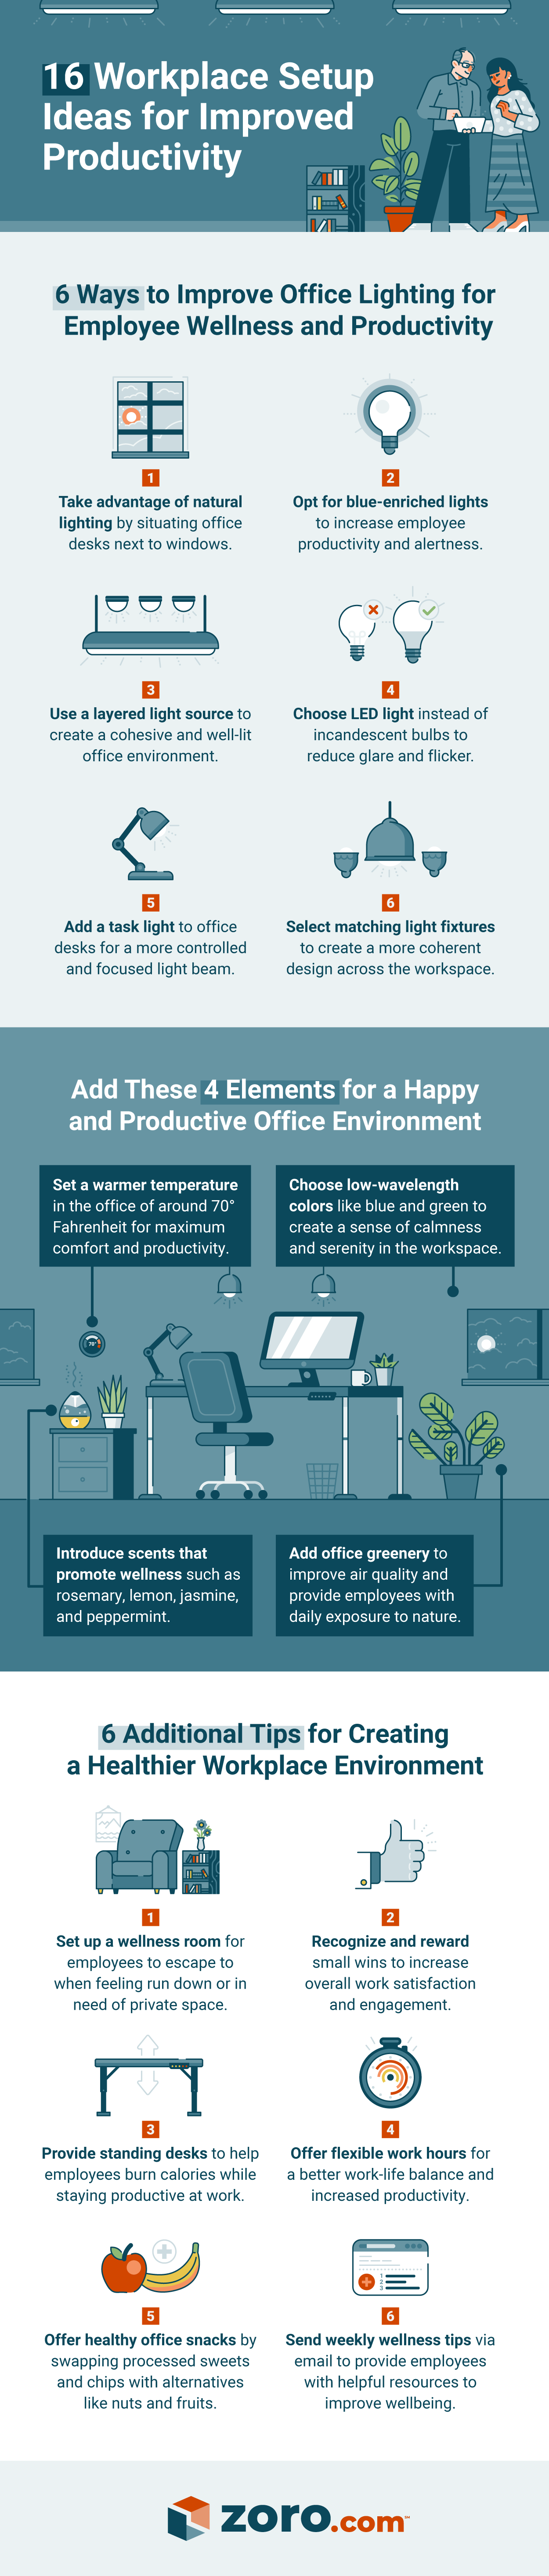 16 Workplace Setup Ideas for Improved Productivity